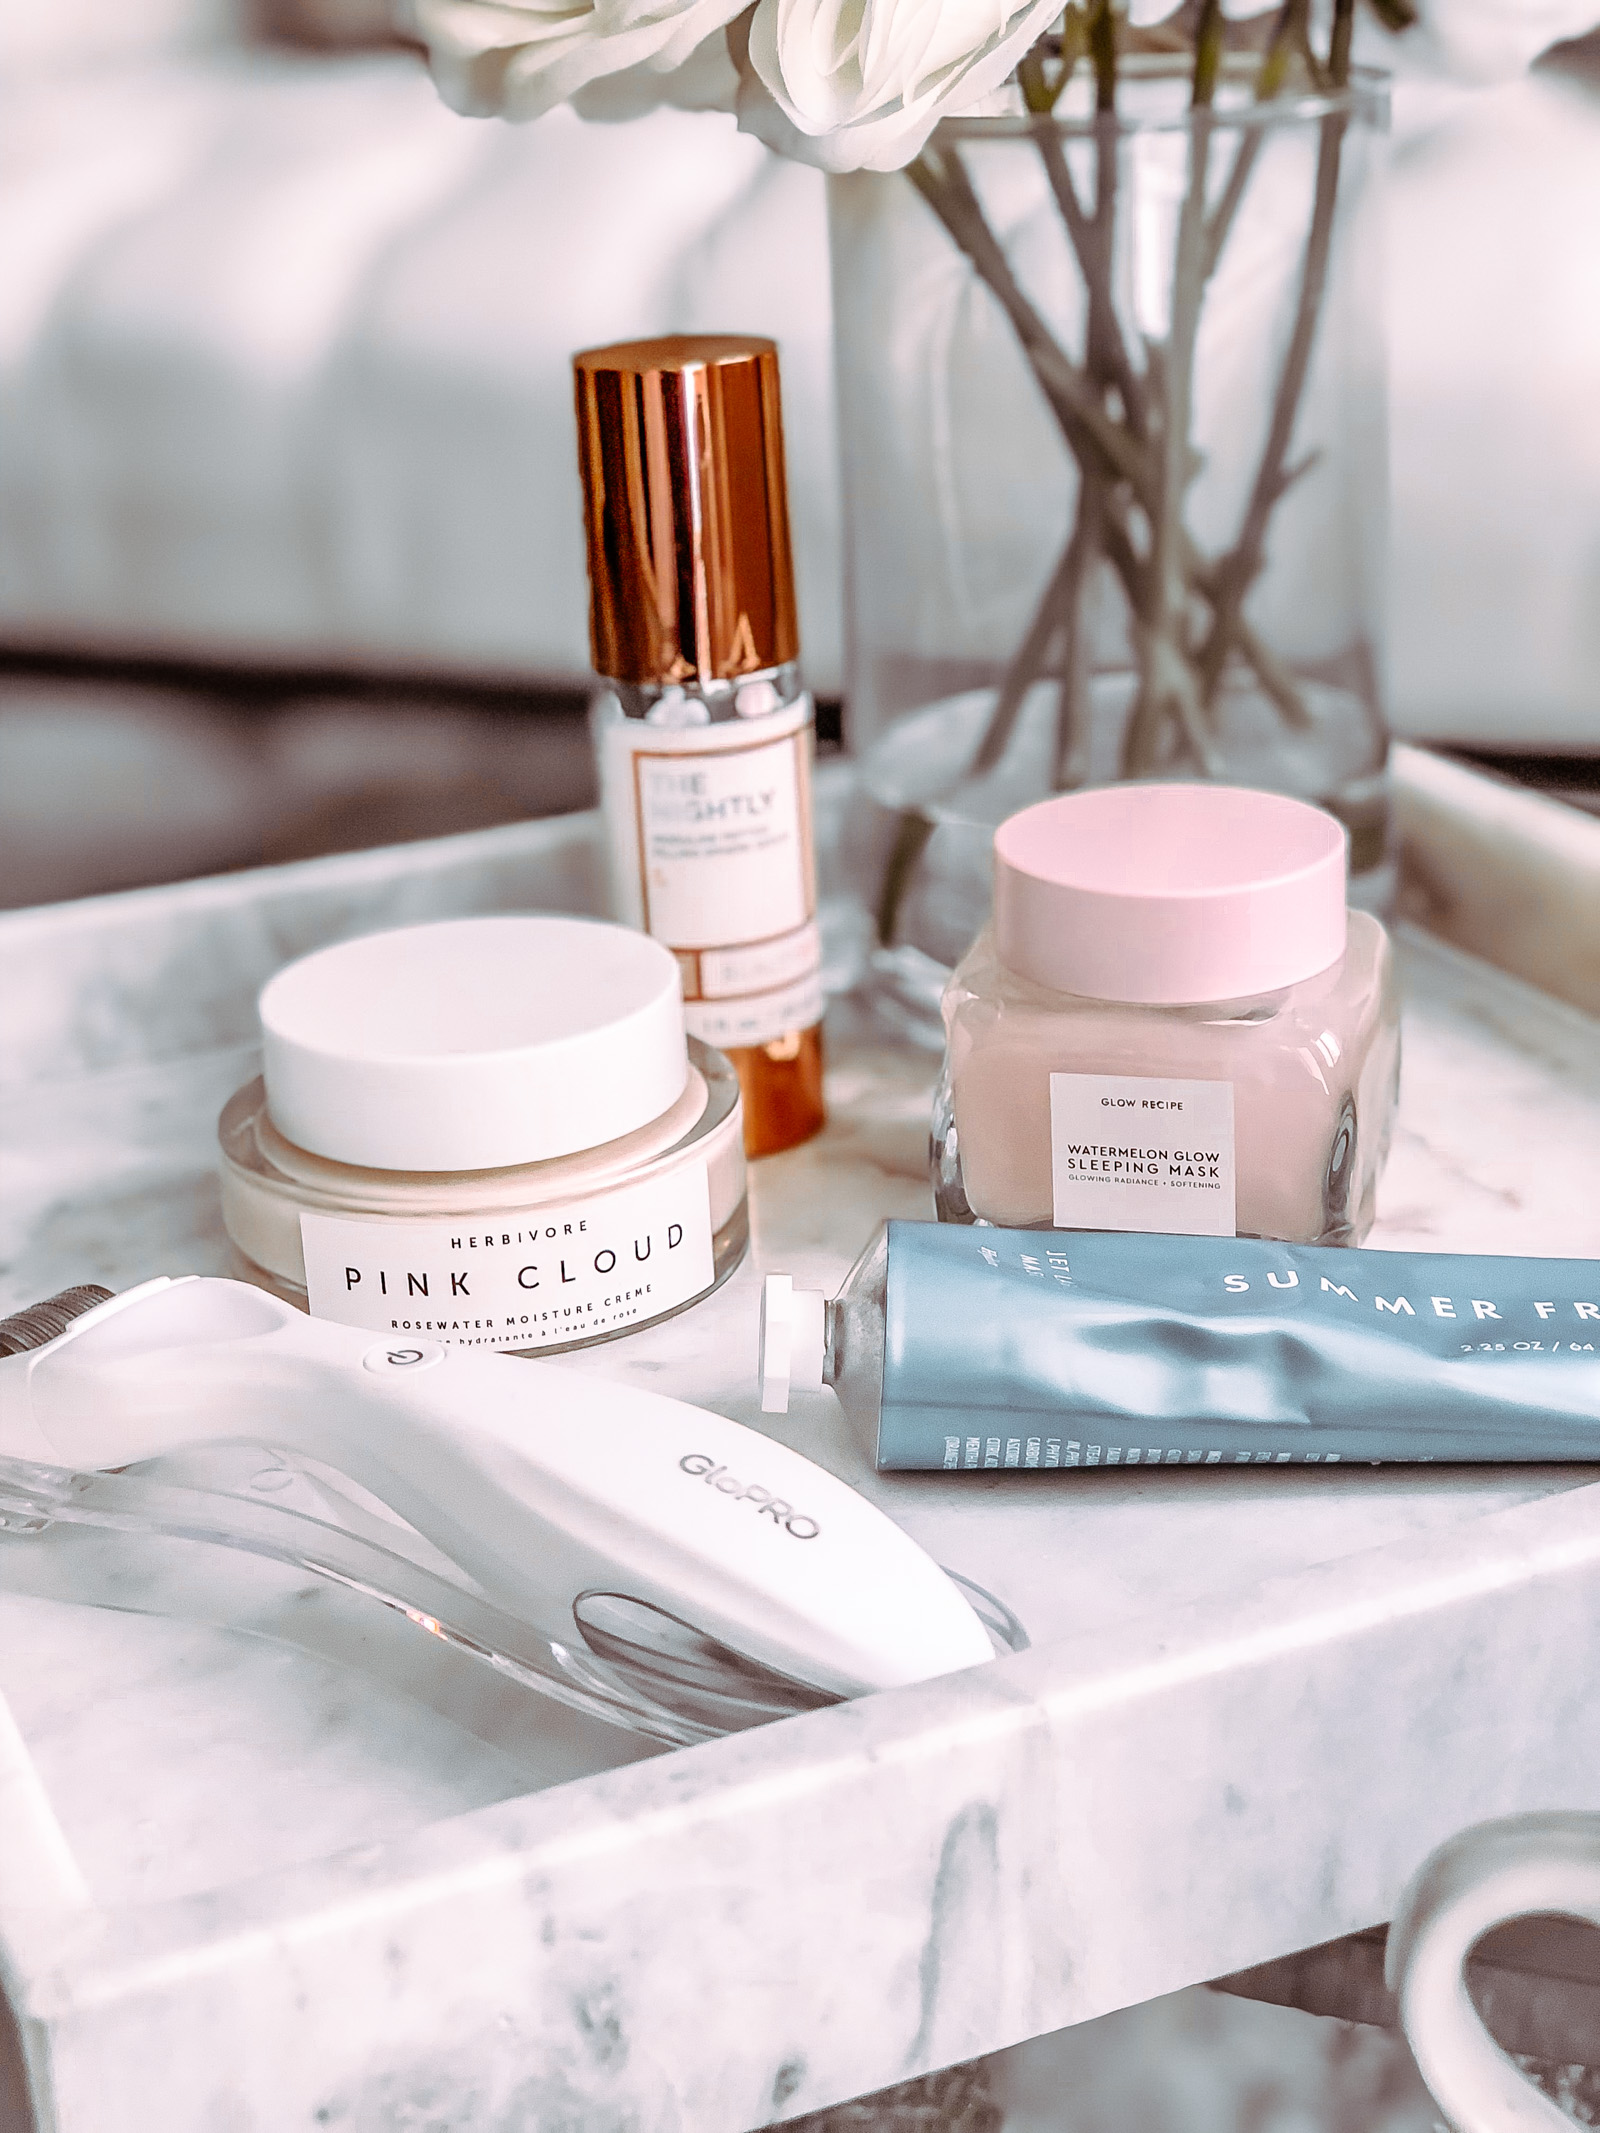 Is It Worth The Hype? 4 Popular Beauty Products All Over Social Media | Summer Friday's Jet Lag Mask, GloPro Microneedling, watermelon glow sleeping mask, Pink Cloud by Herbivore | Blondie in the City by Hayley Larue